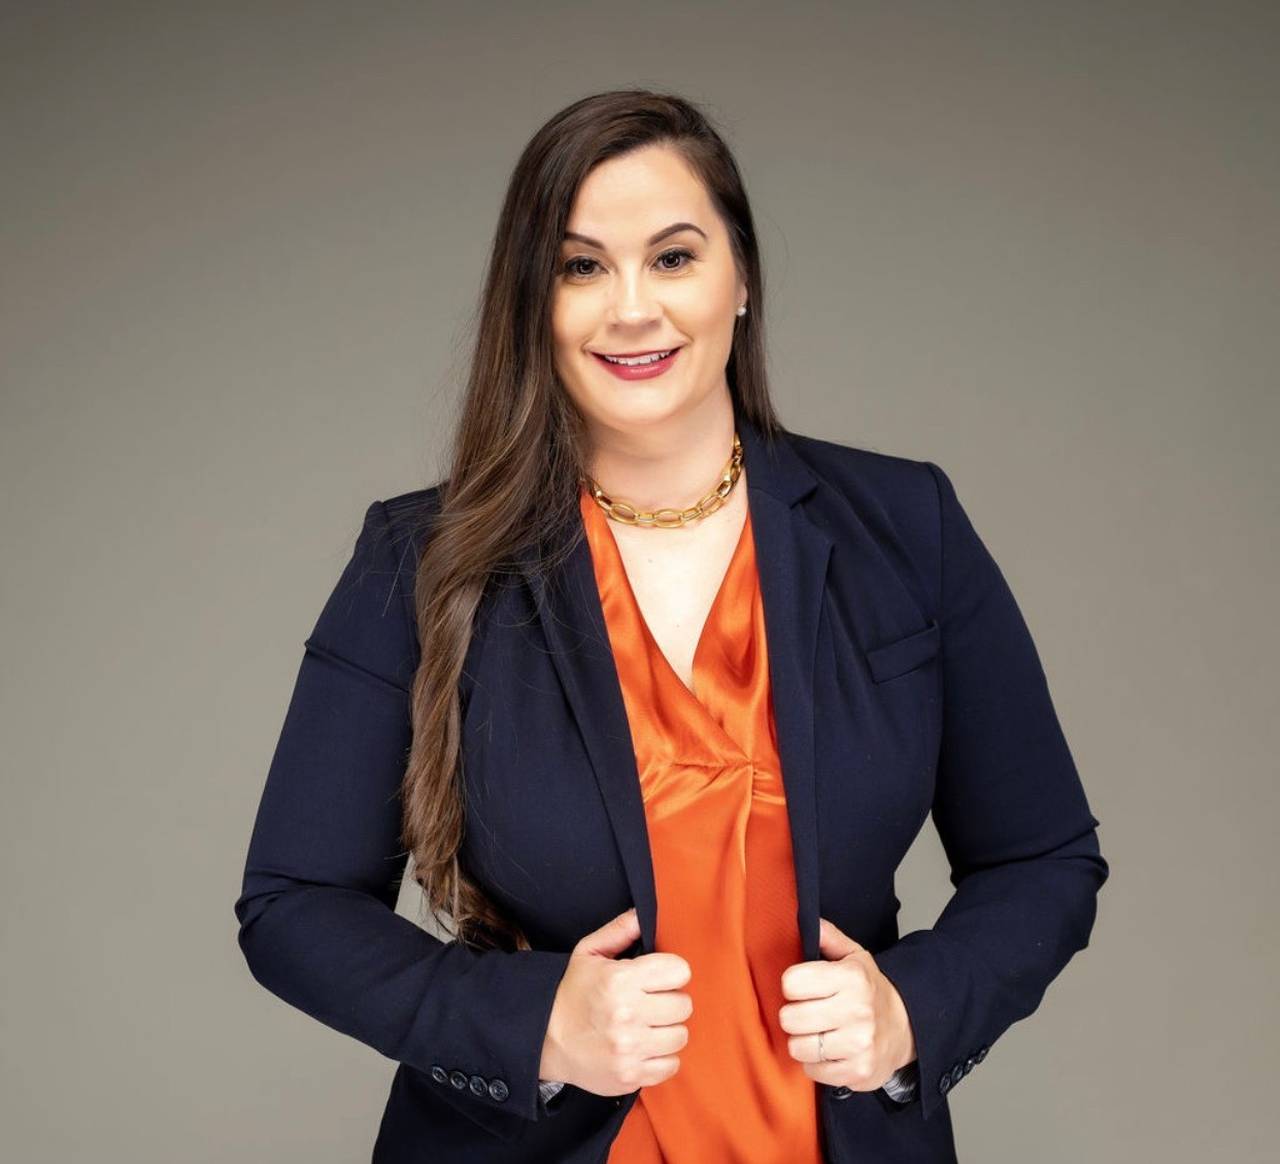 A photo of Margo Bruner-Settles wearing a black suit jacket and orange shirt in a studio with a tan background.